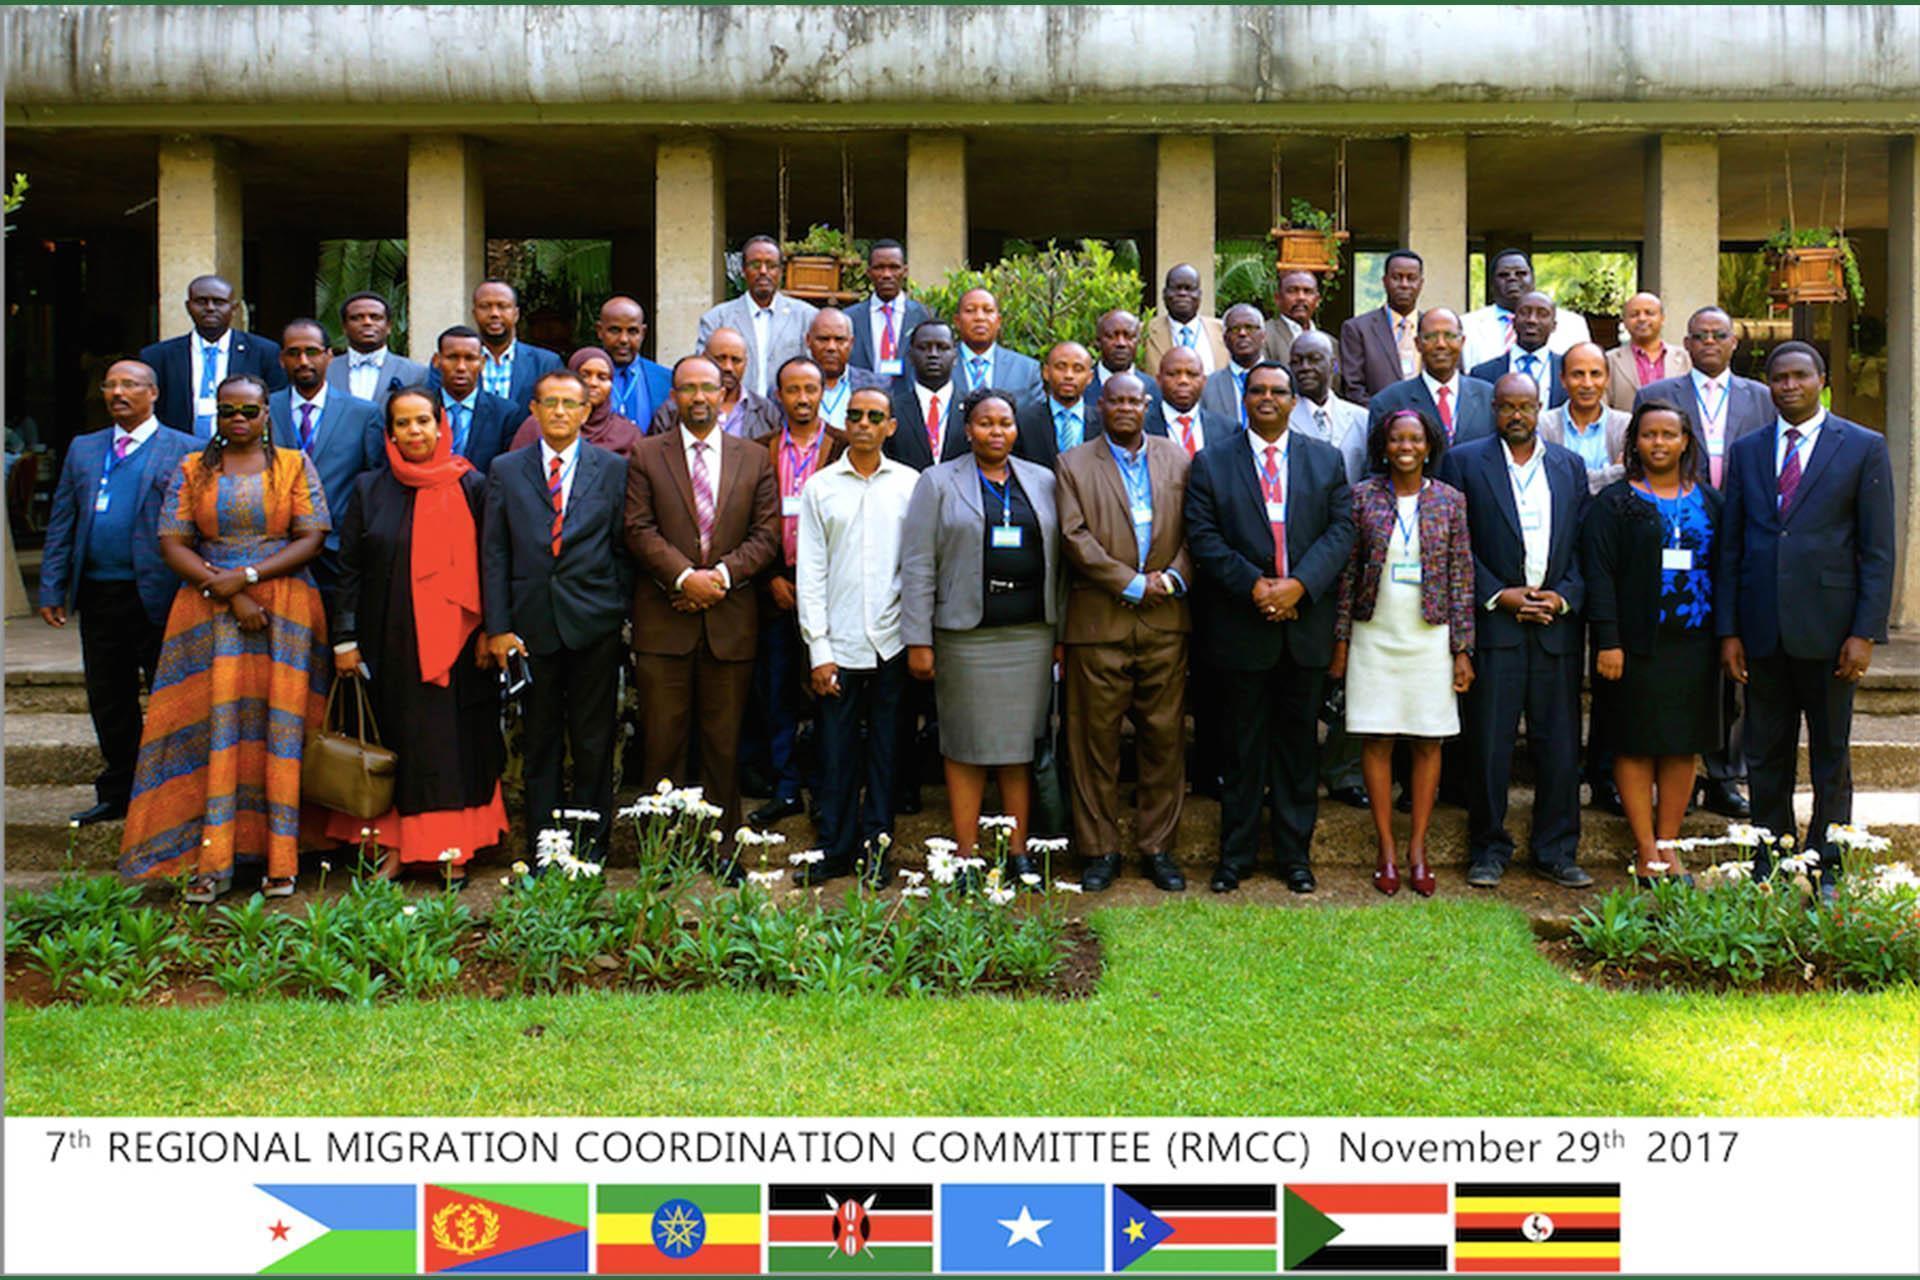 IGAD Hold its 7th Regional Migration Coordination Committee (RMCC)